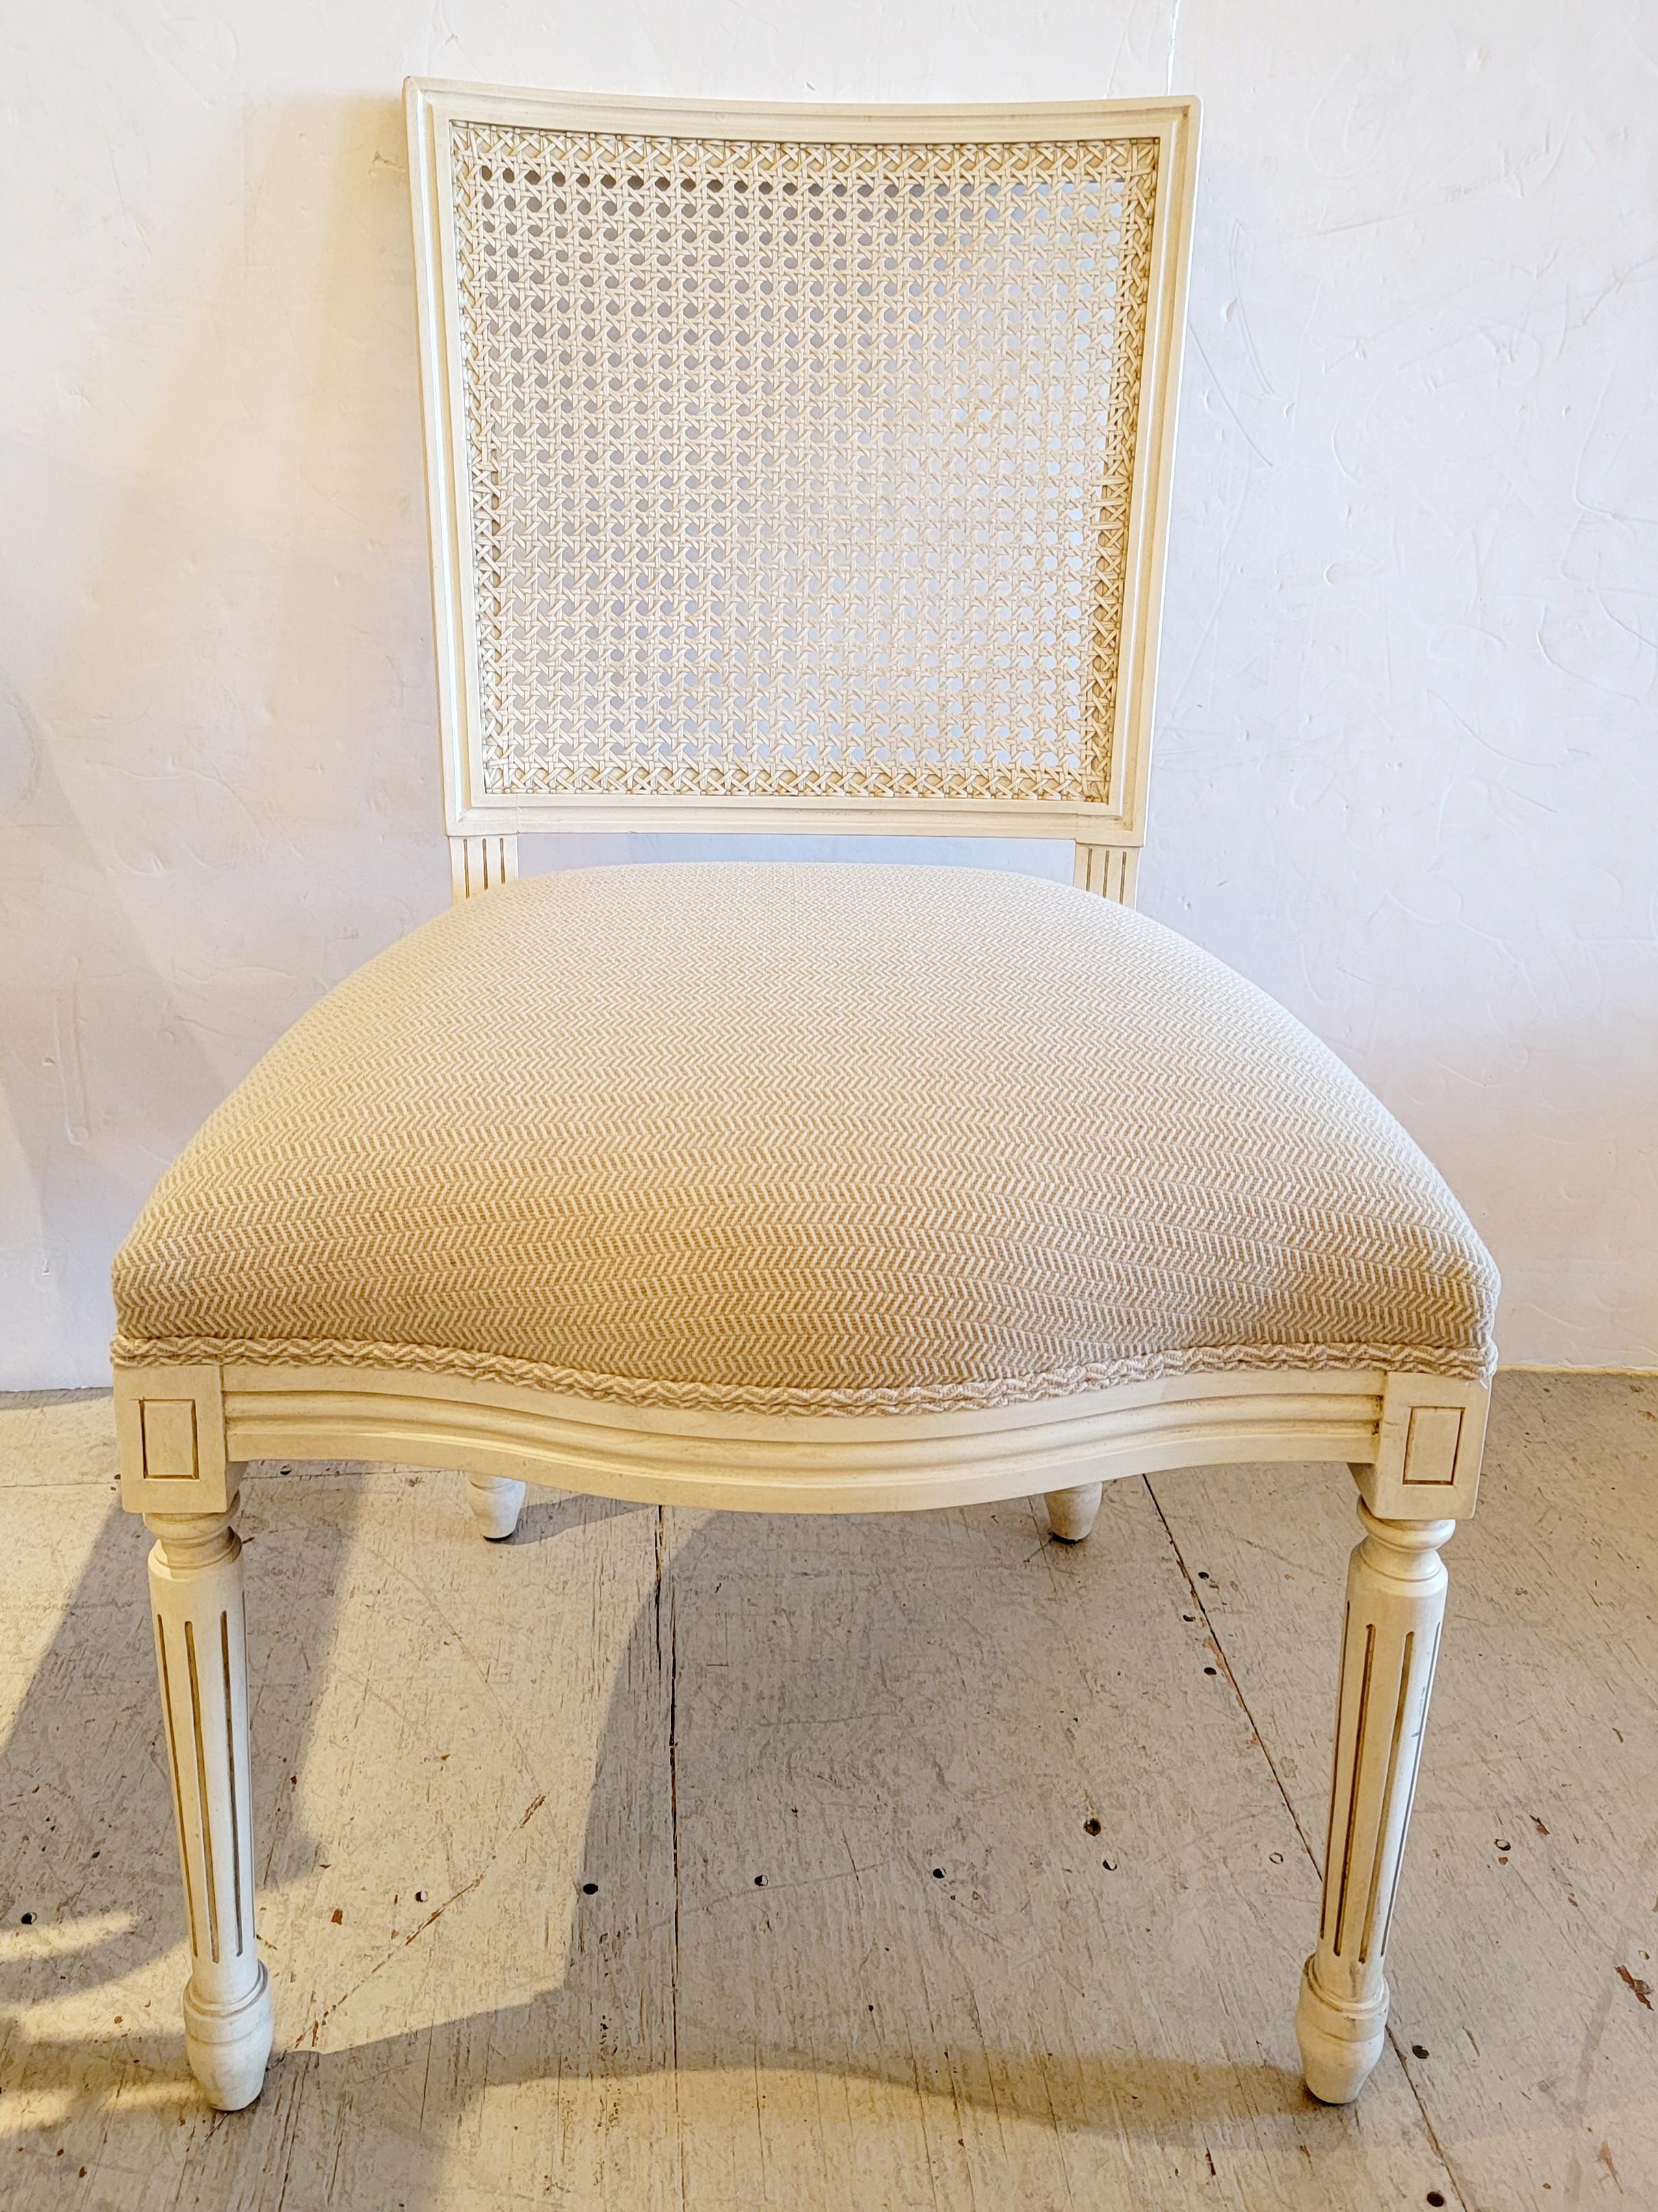 Stunning luxurious set of 4 carved painted wood side dining chairs in a neutral cream and having upholstered cream on cream herringbone seats. Roomy and substantial, very elegant chairs.